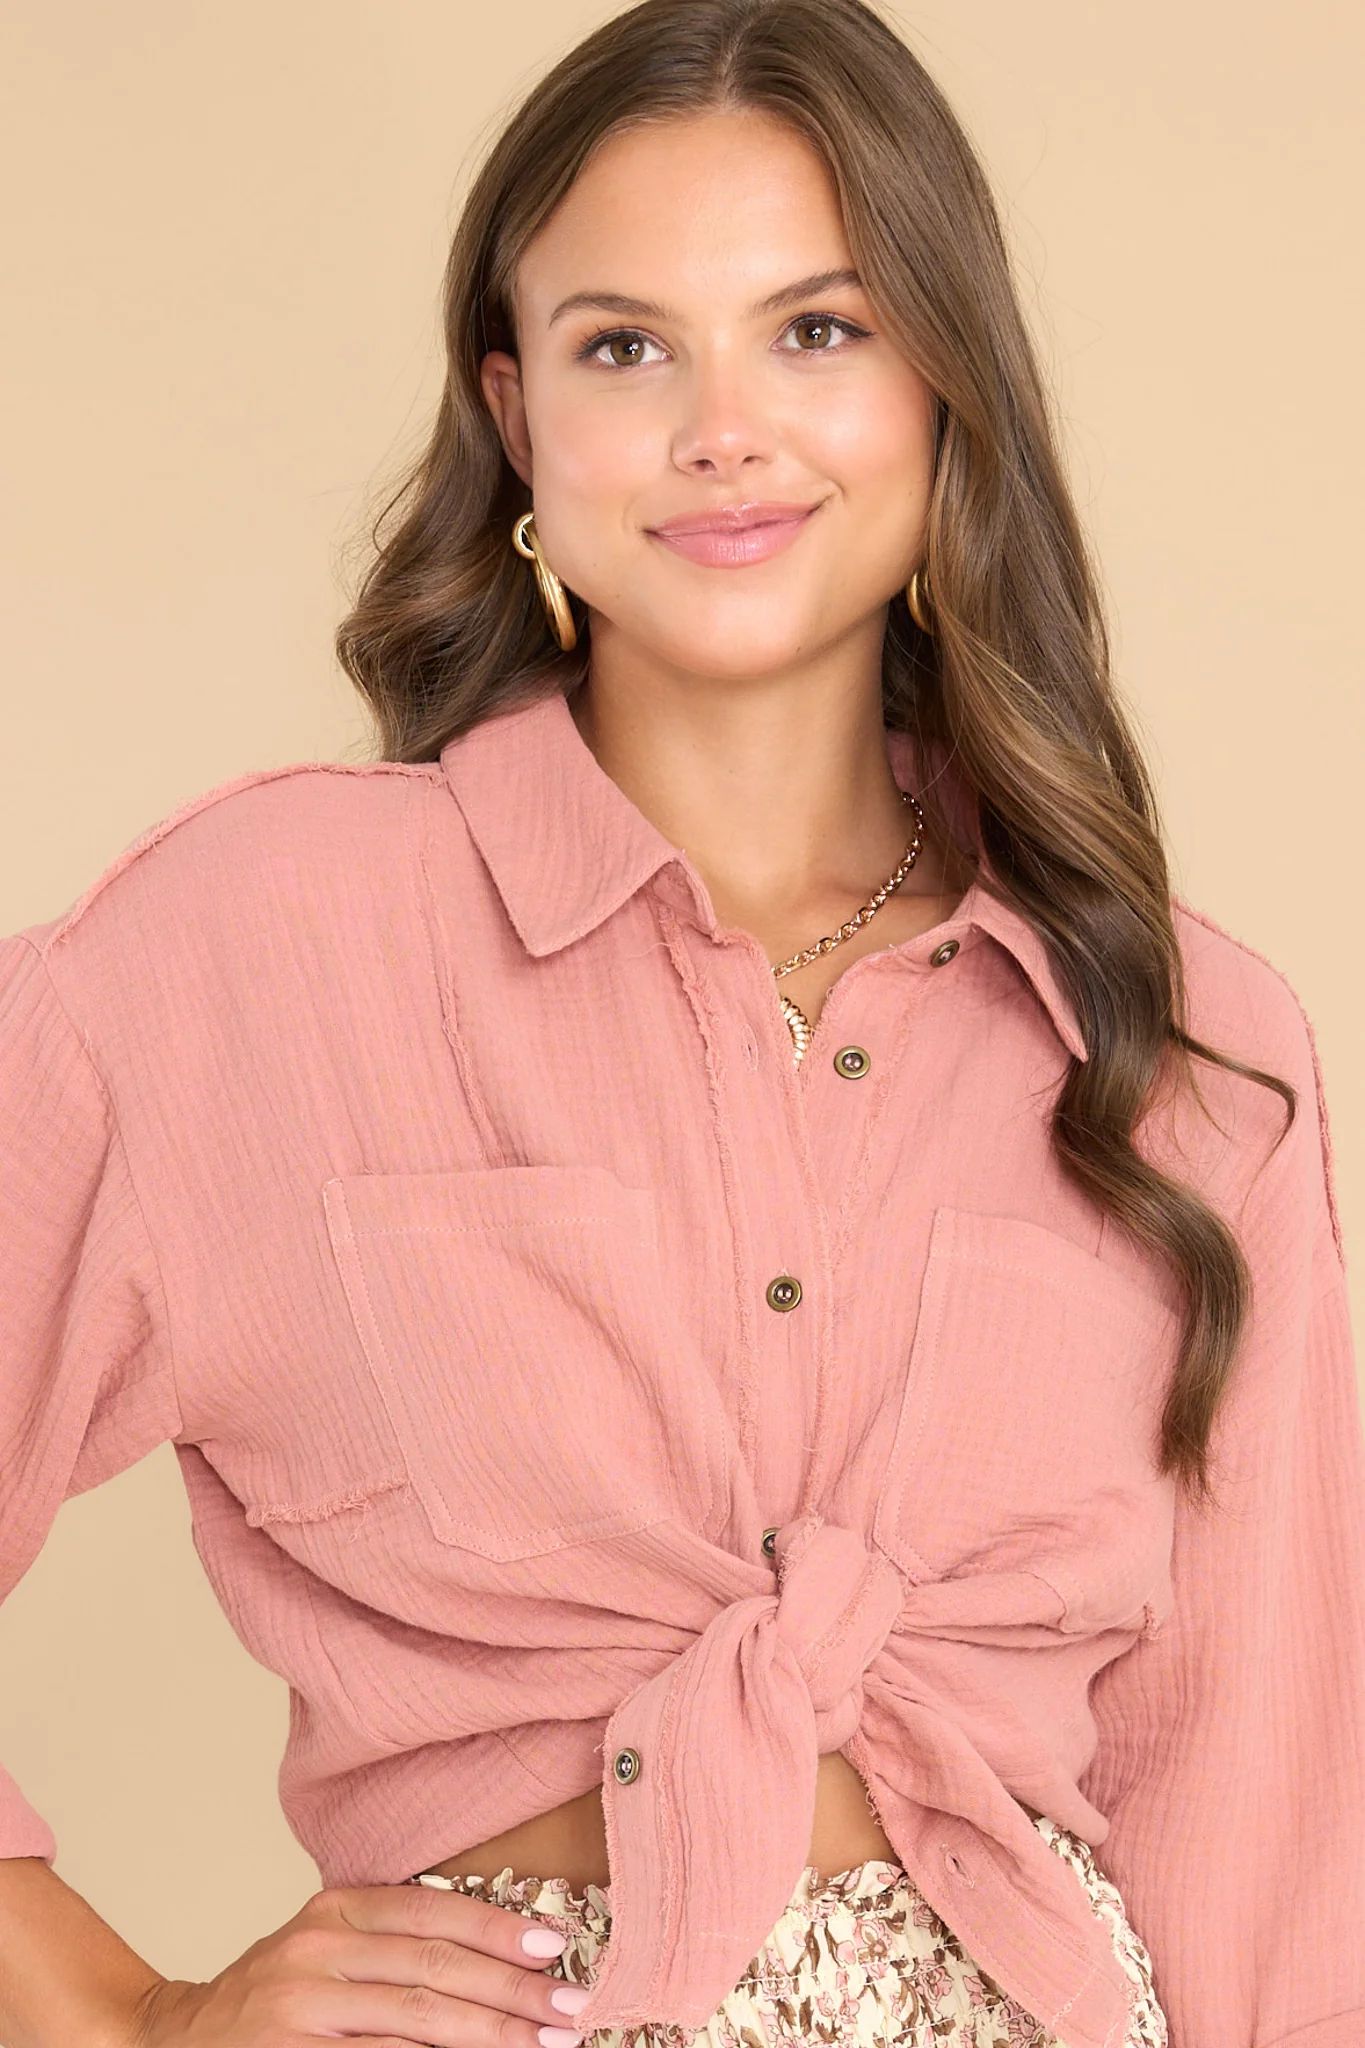 Totally Convinced Blush Top | Red Dress 